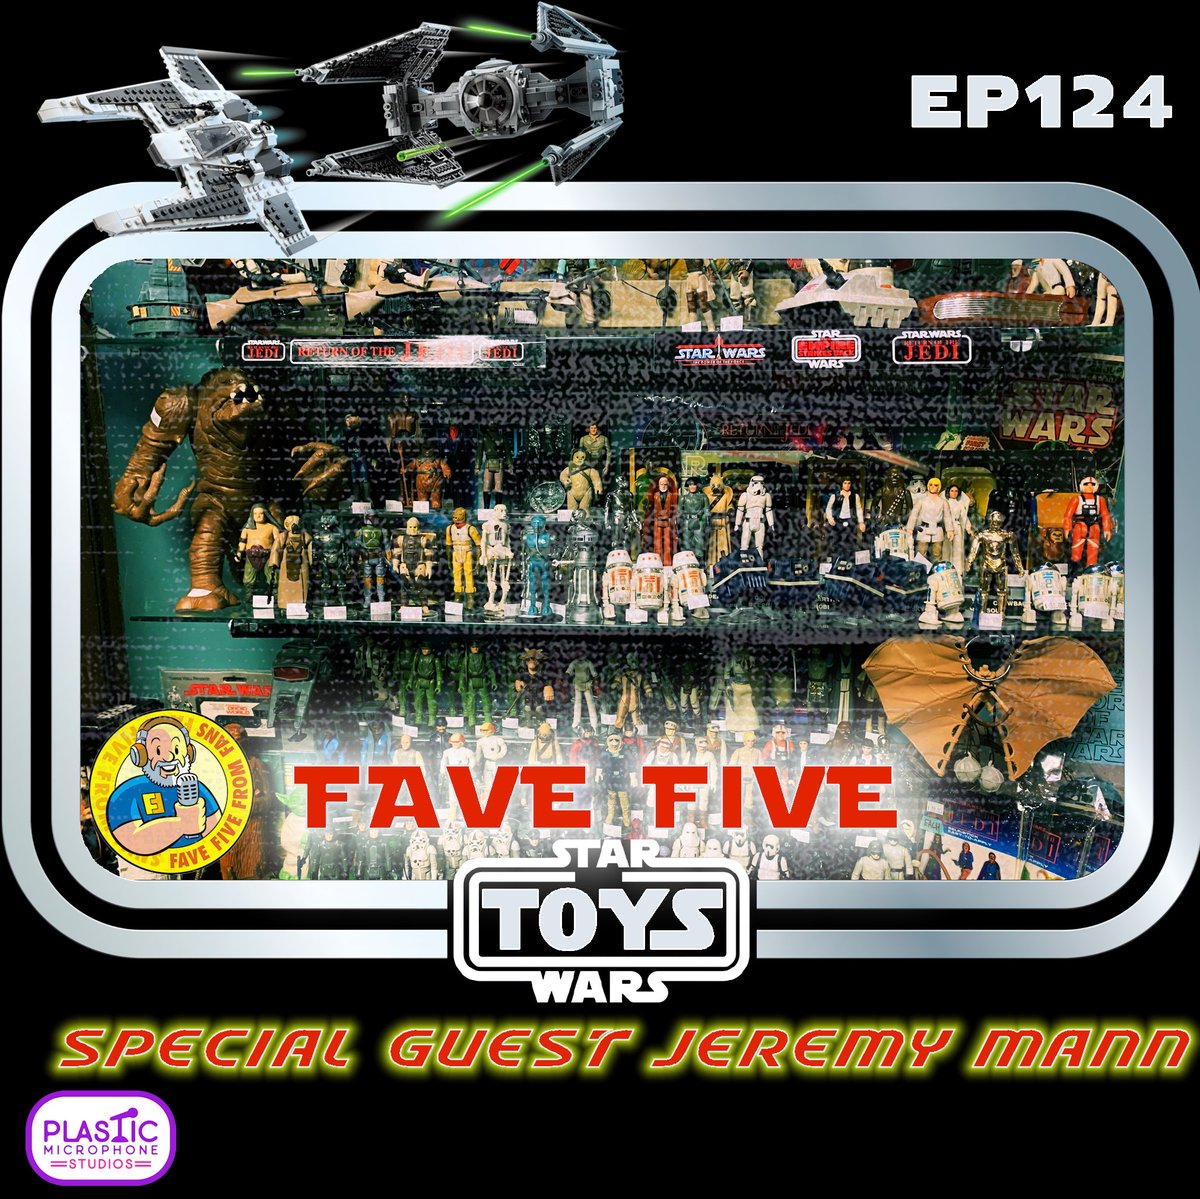 New Episode! FFFF Ep124 Fave Five Star Wars Toys. Check it out today. pod.link/1494494903/epi…